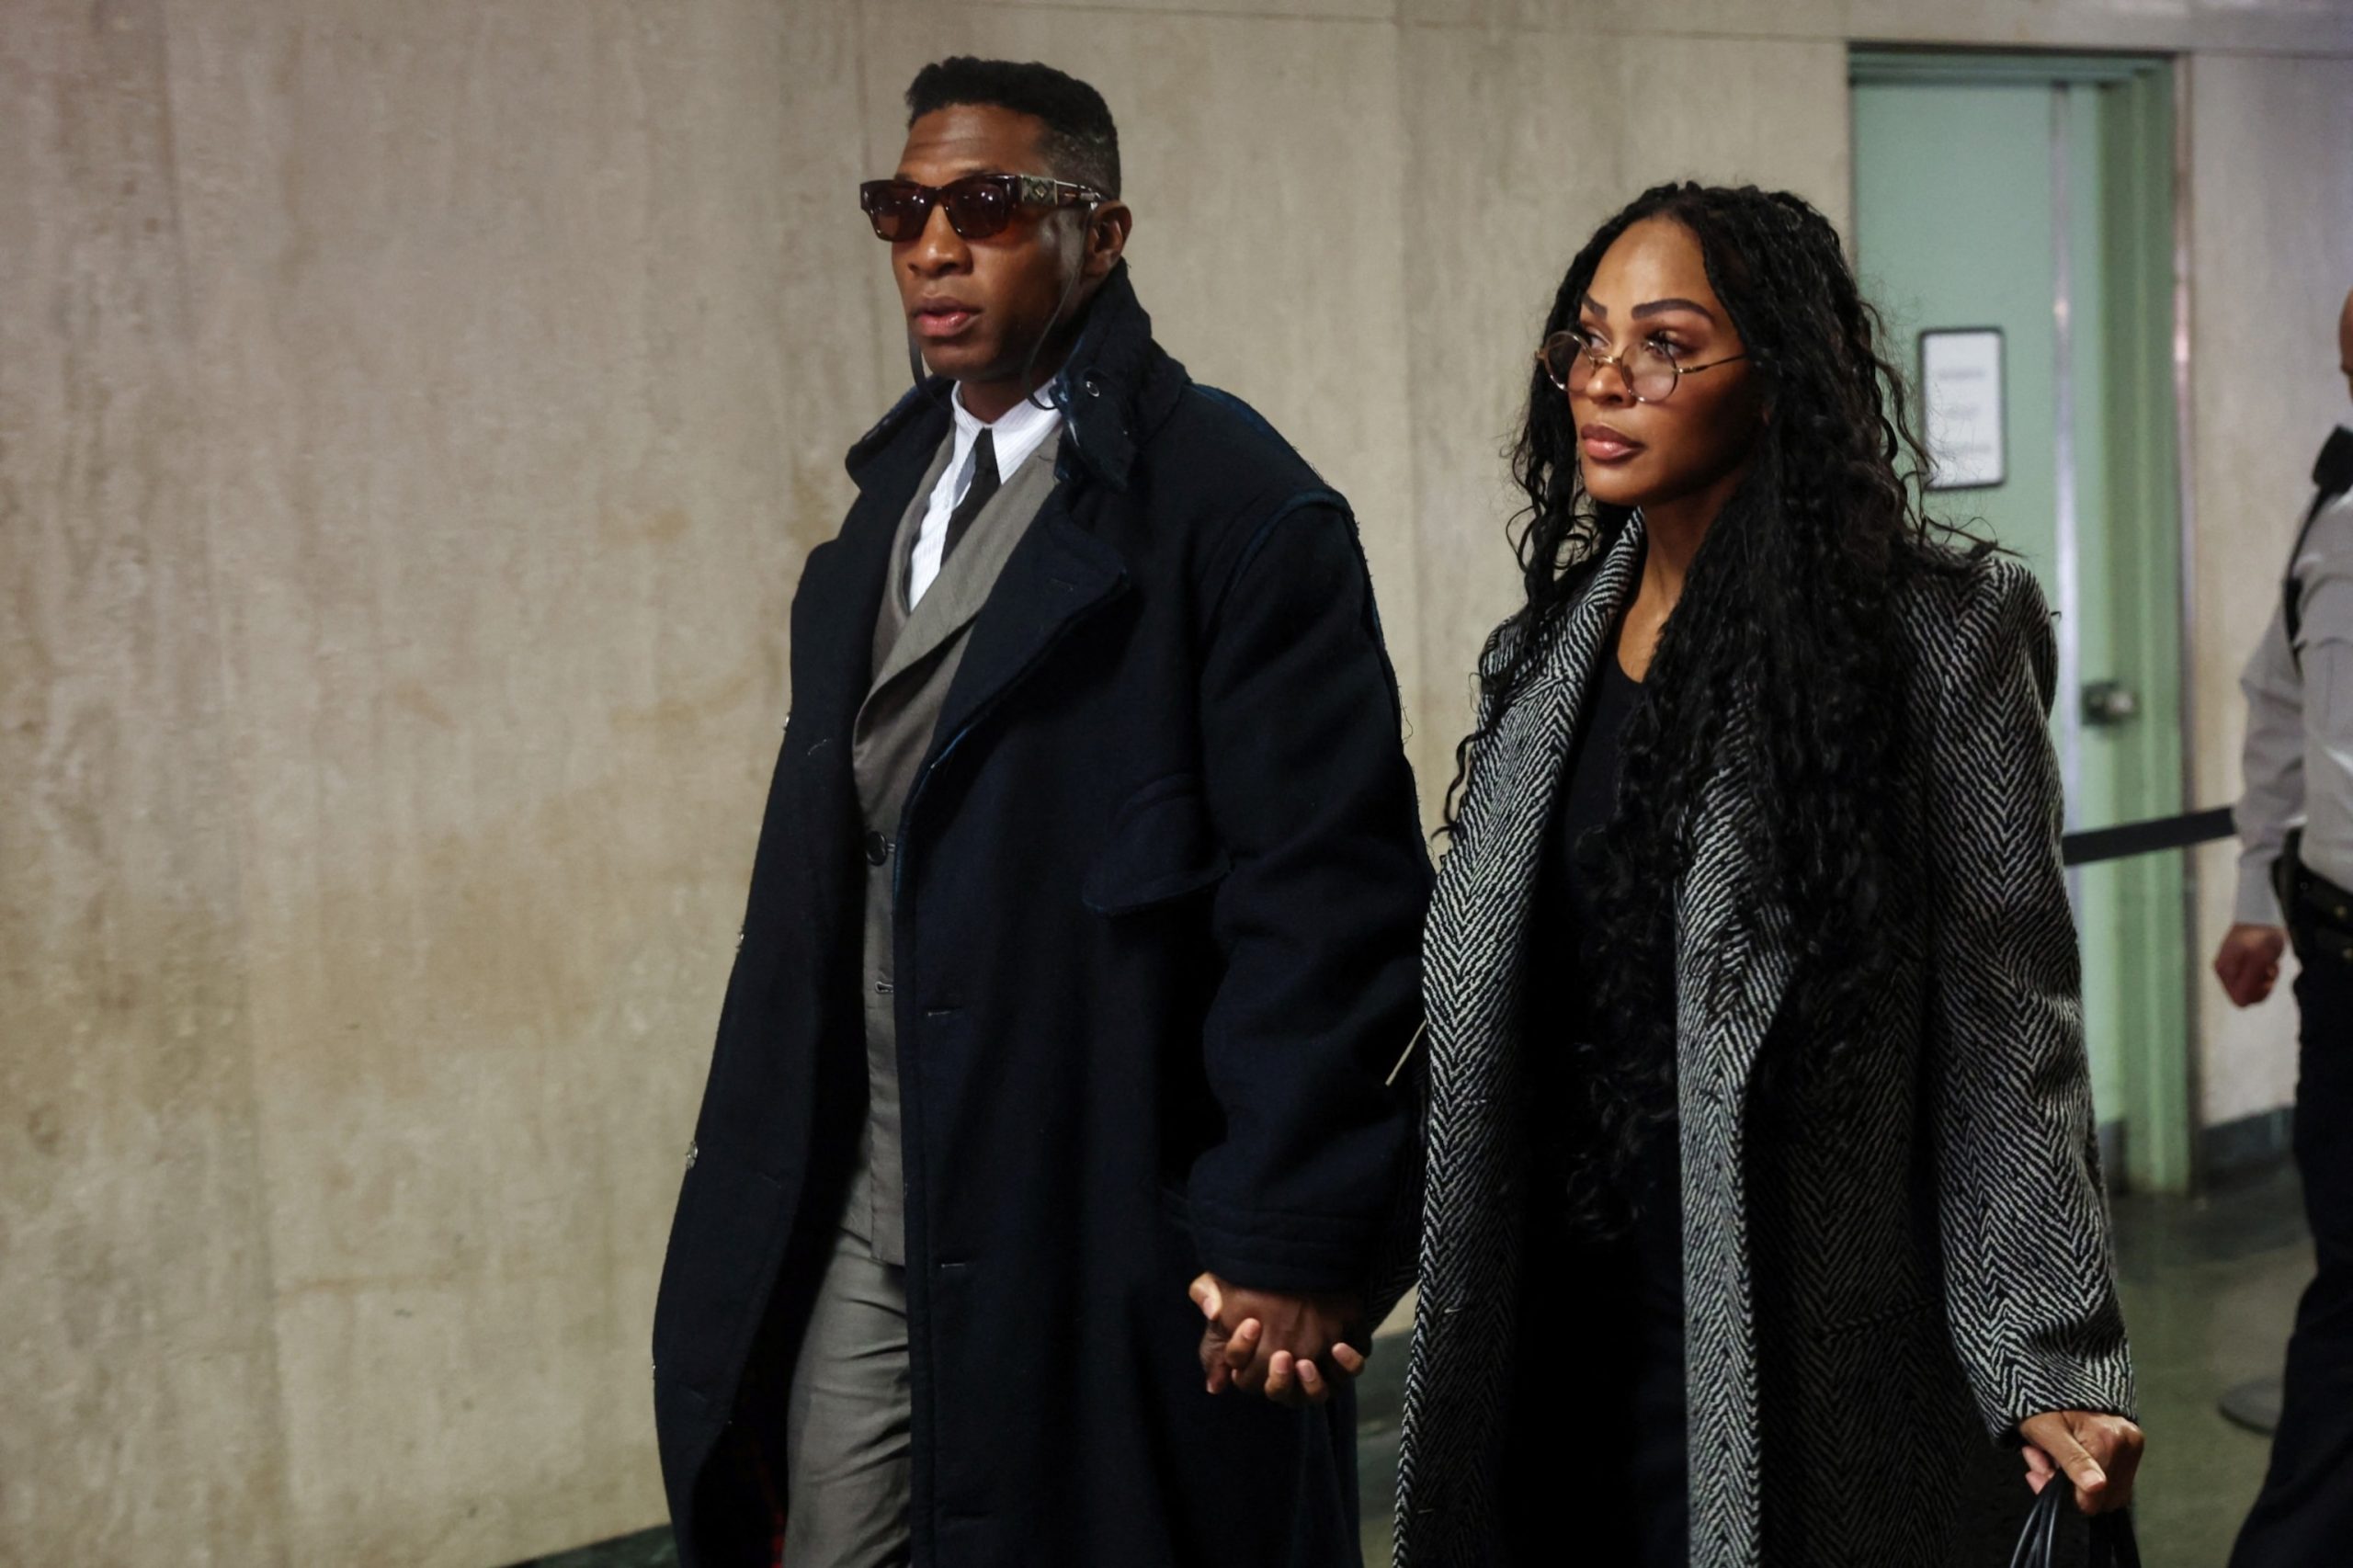 In Jonathan Majors' Trial on Domestic Violence Charges, Judge Permits Mention of Accuser's Arrest